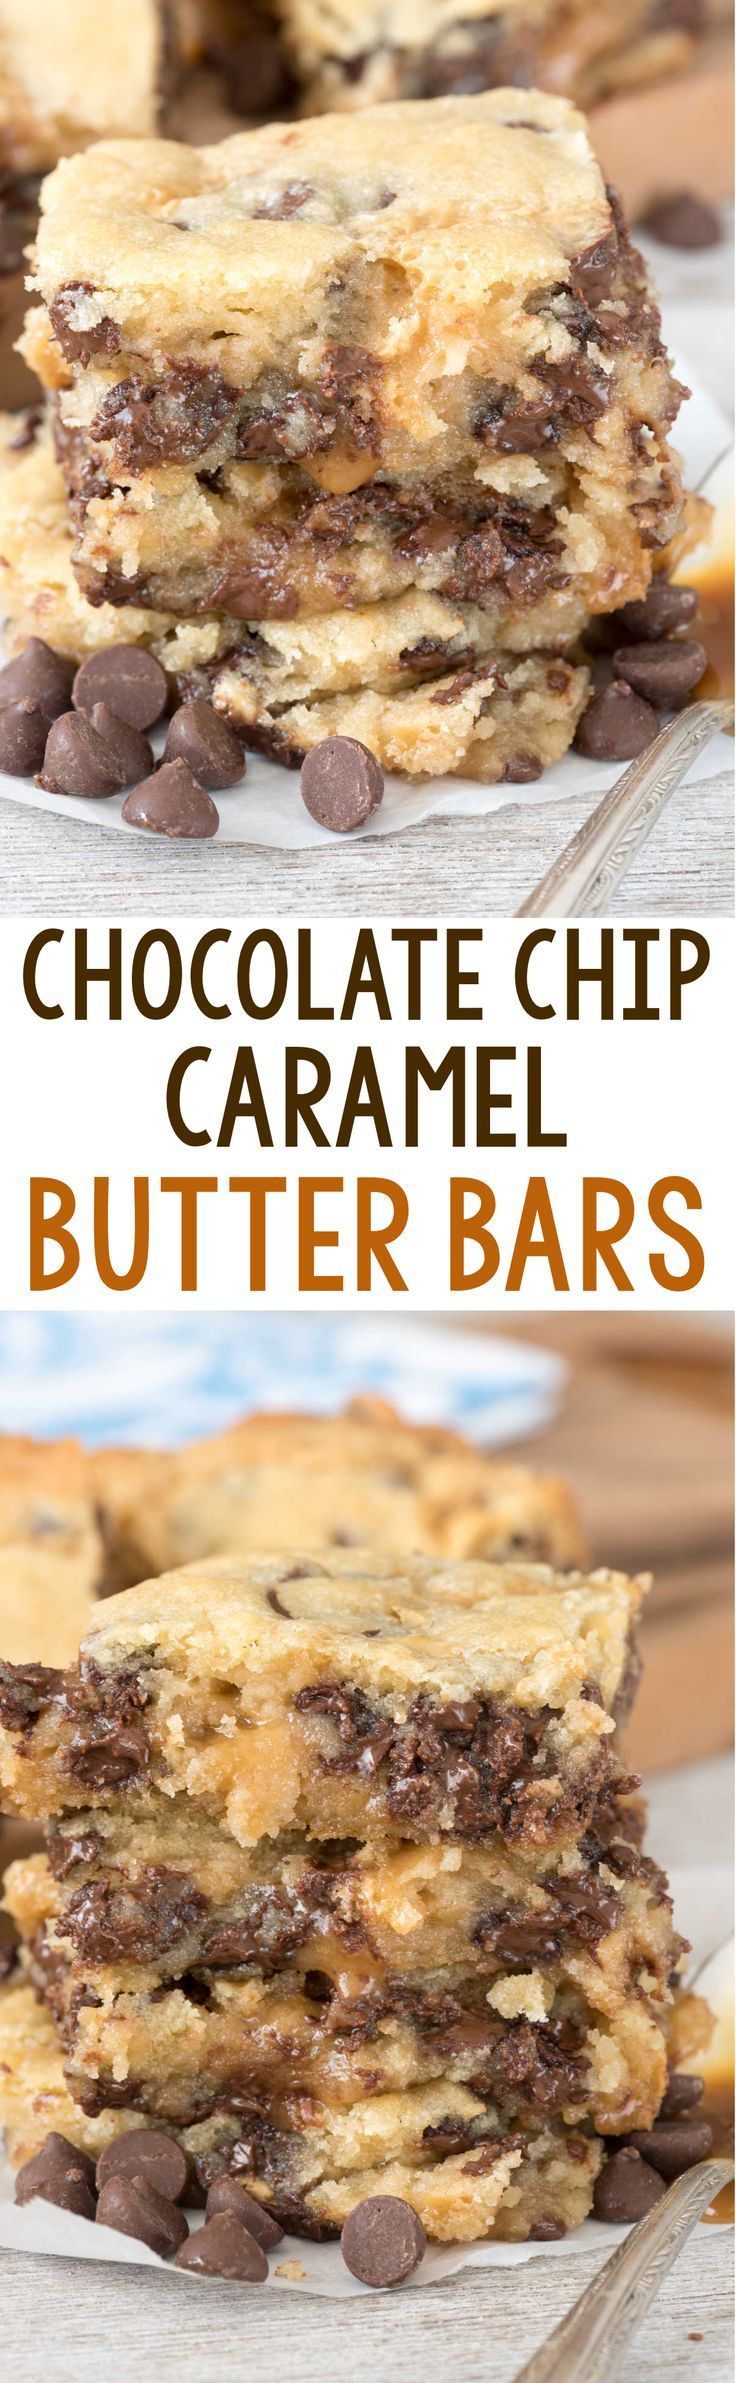 Chocolate Chip Caramel Butter Bars – easy sugar cookie bars filled with chocolate chips and sandwiched with gooey caramel sauce!